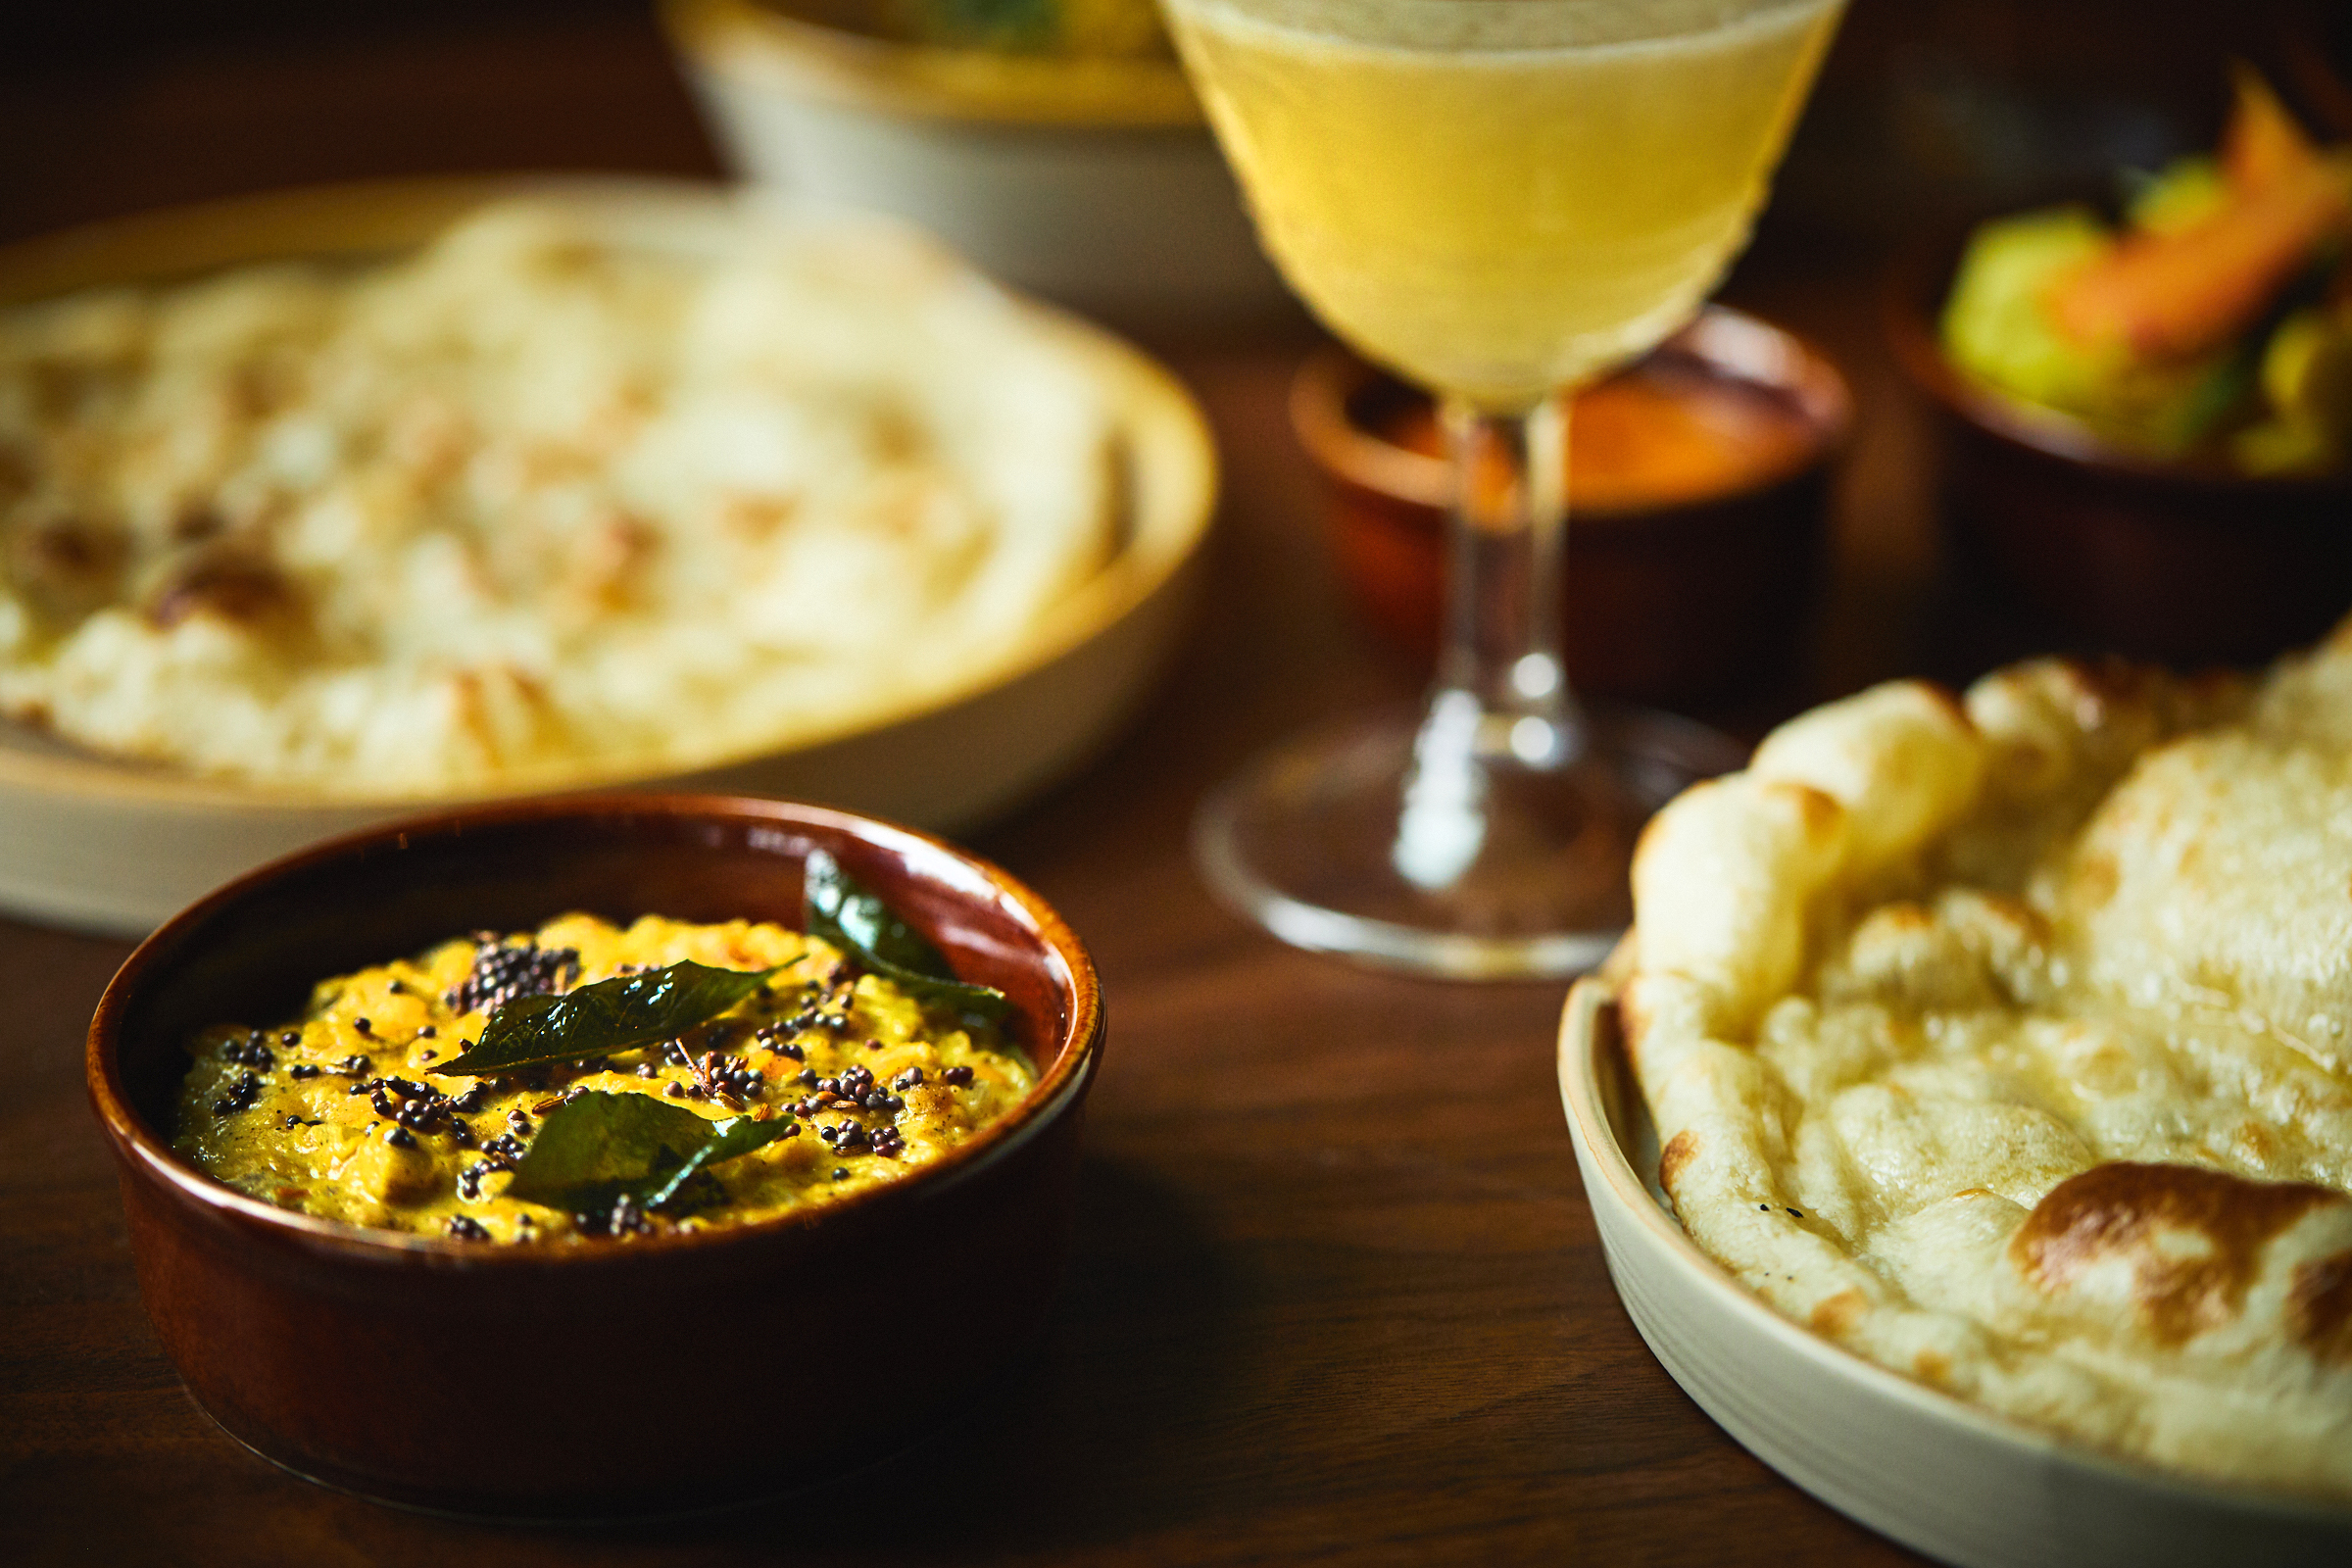 An assortment of Sri Lankan dishes, along with a yellow-colored cocktail.